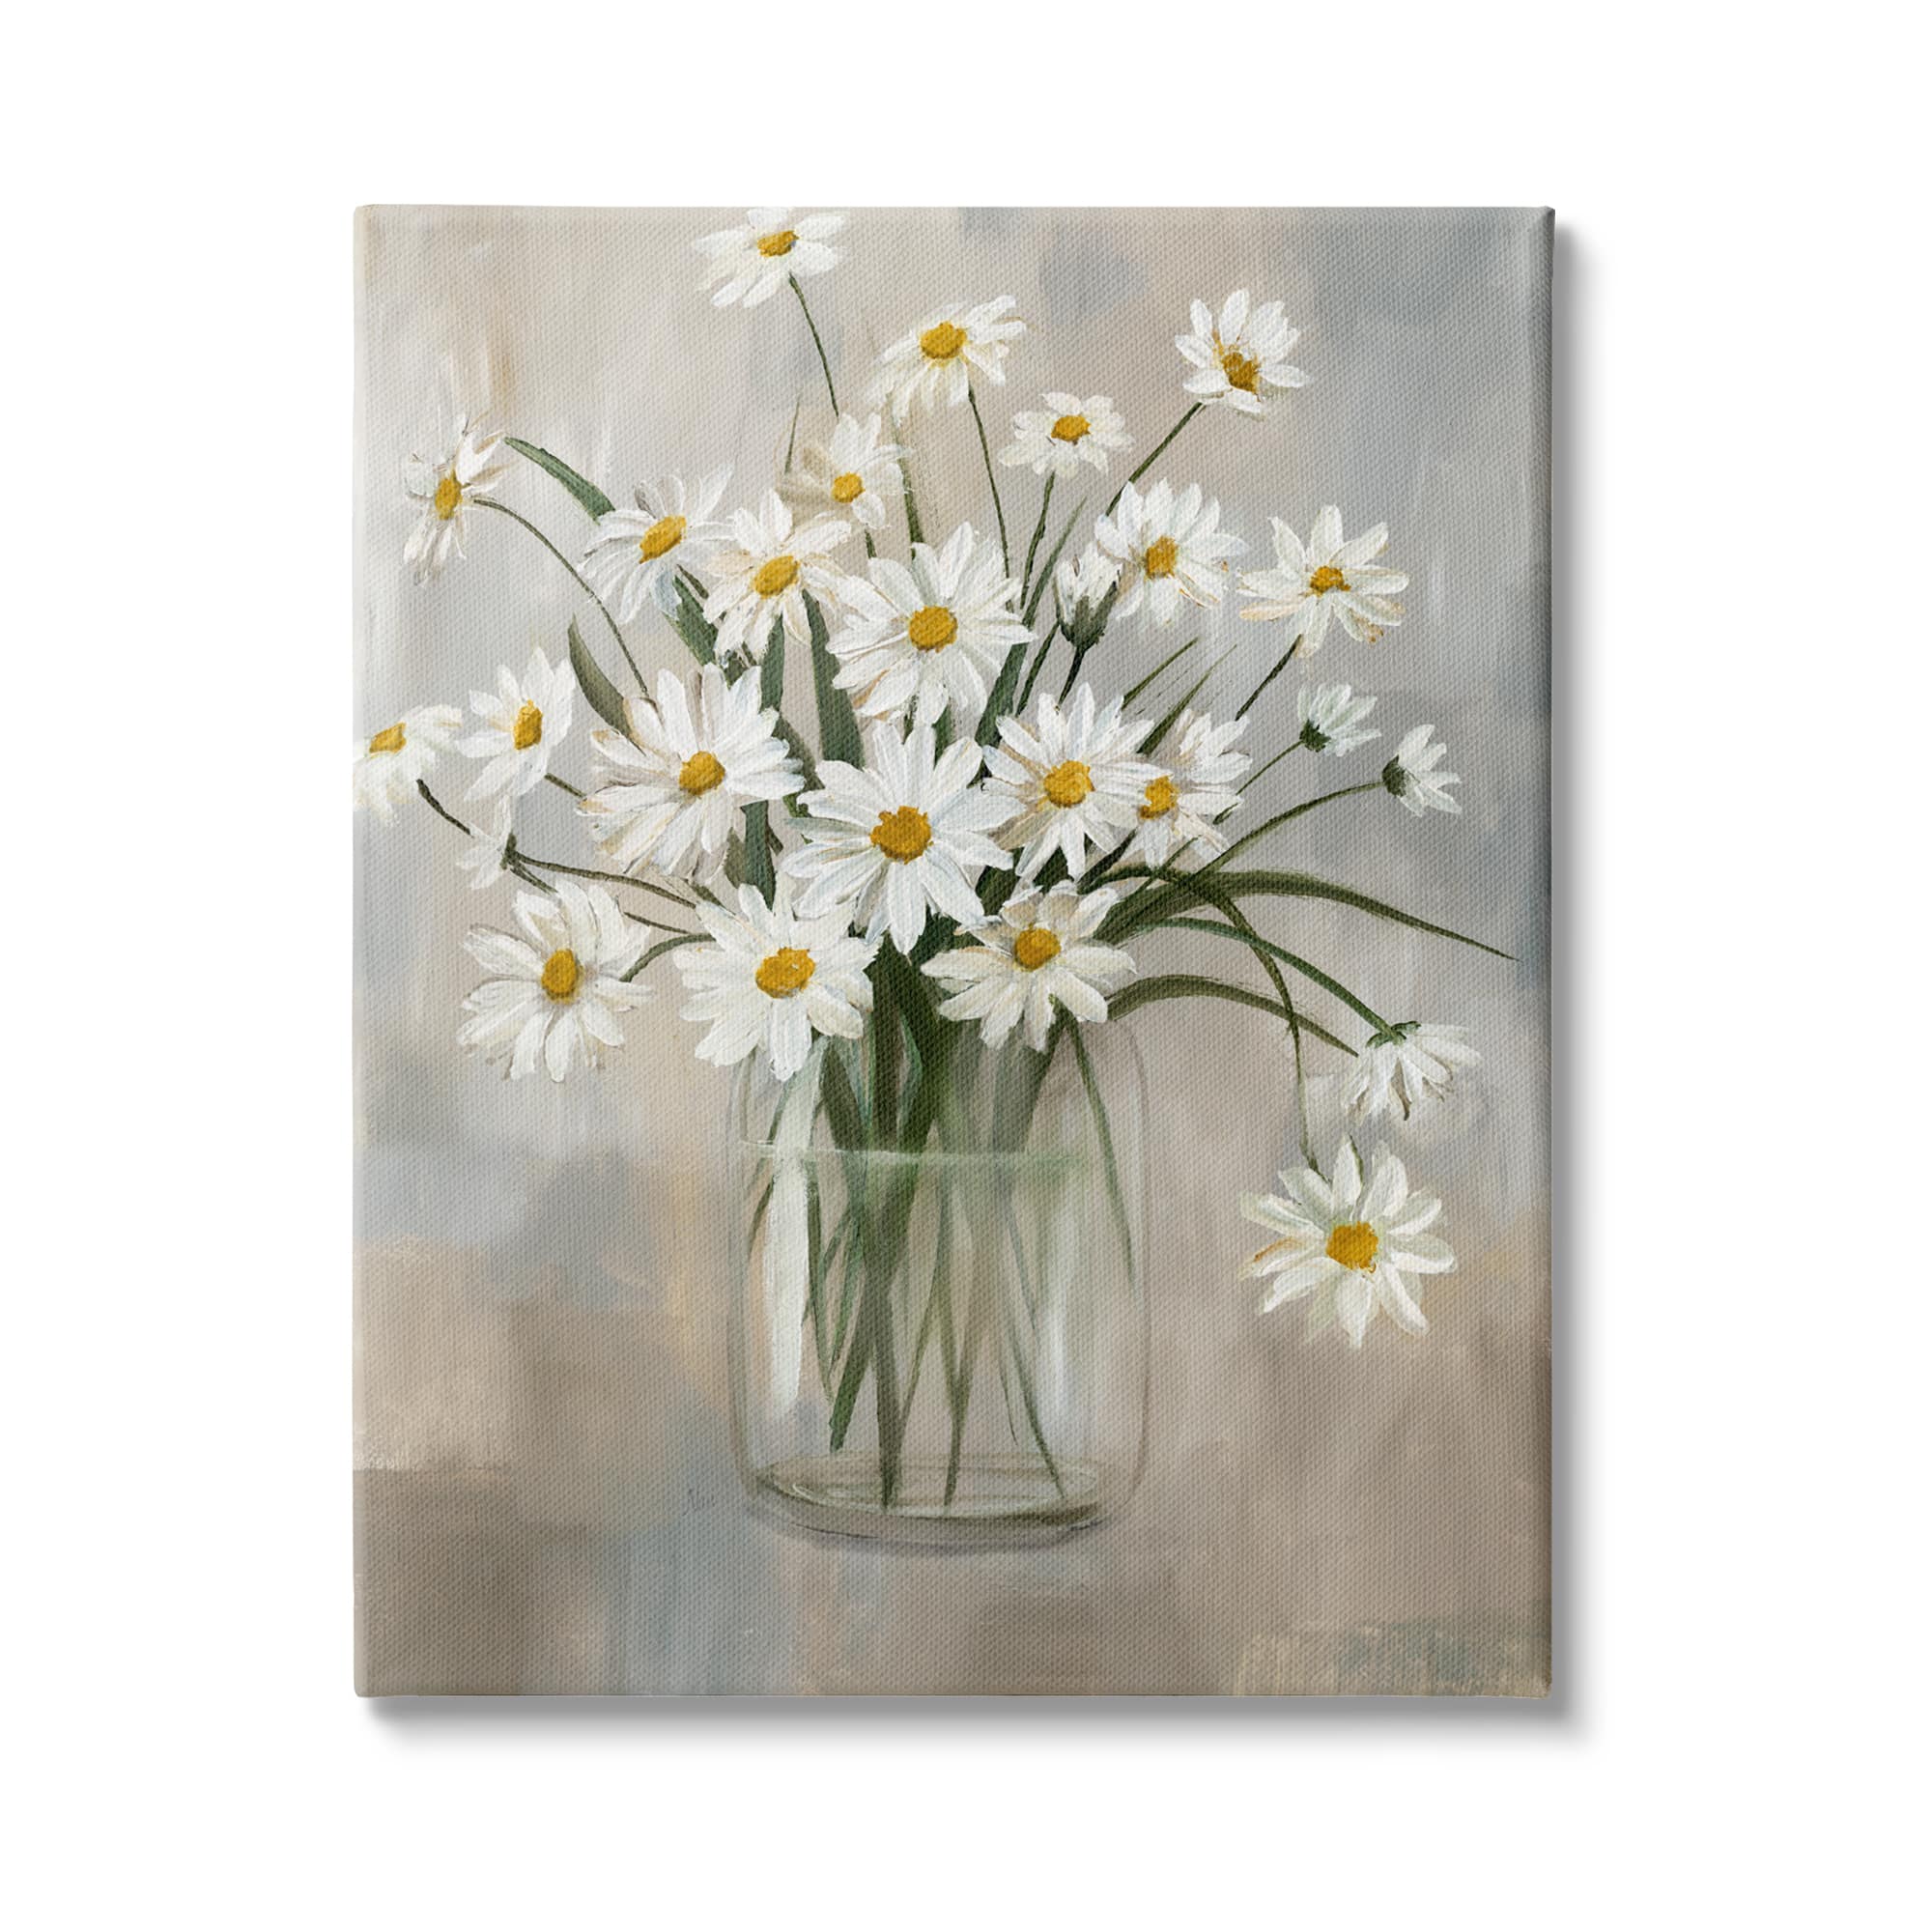 Stupell Industries Daisy Bloom Bouquet Potted Flowers Abstract Pattern Canvas Wall Art 